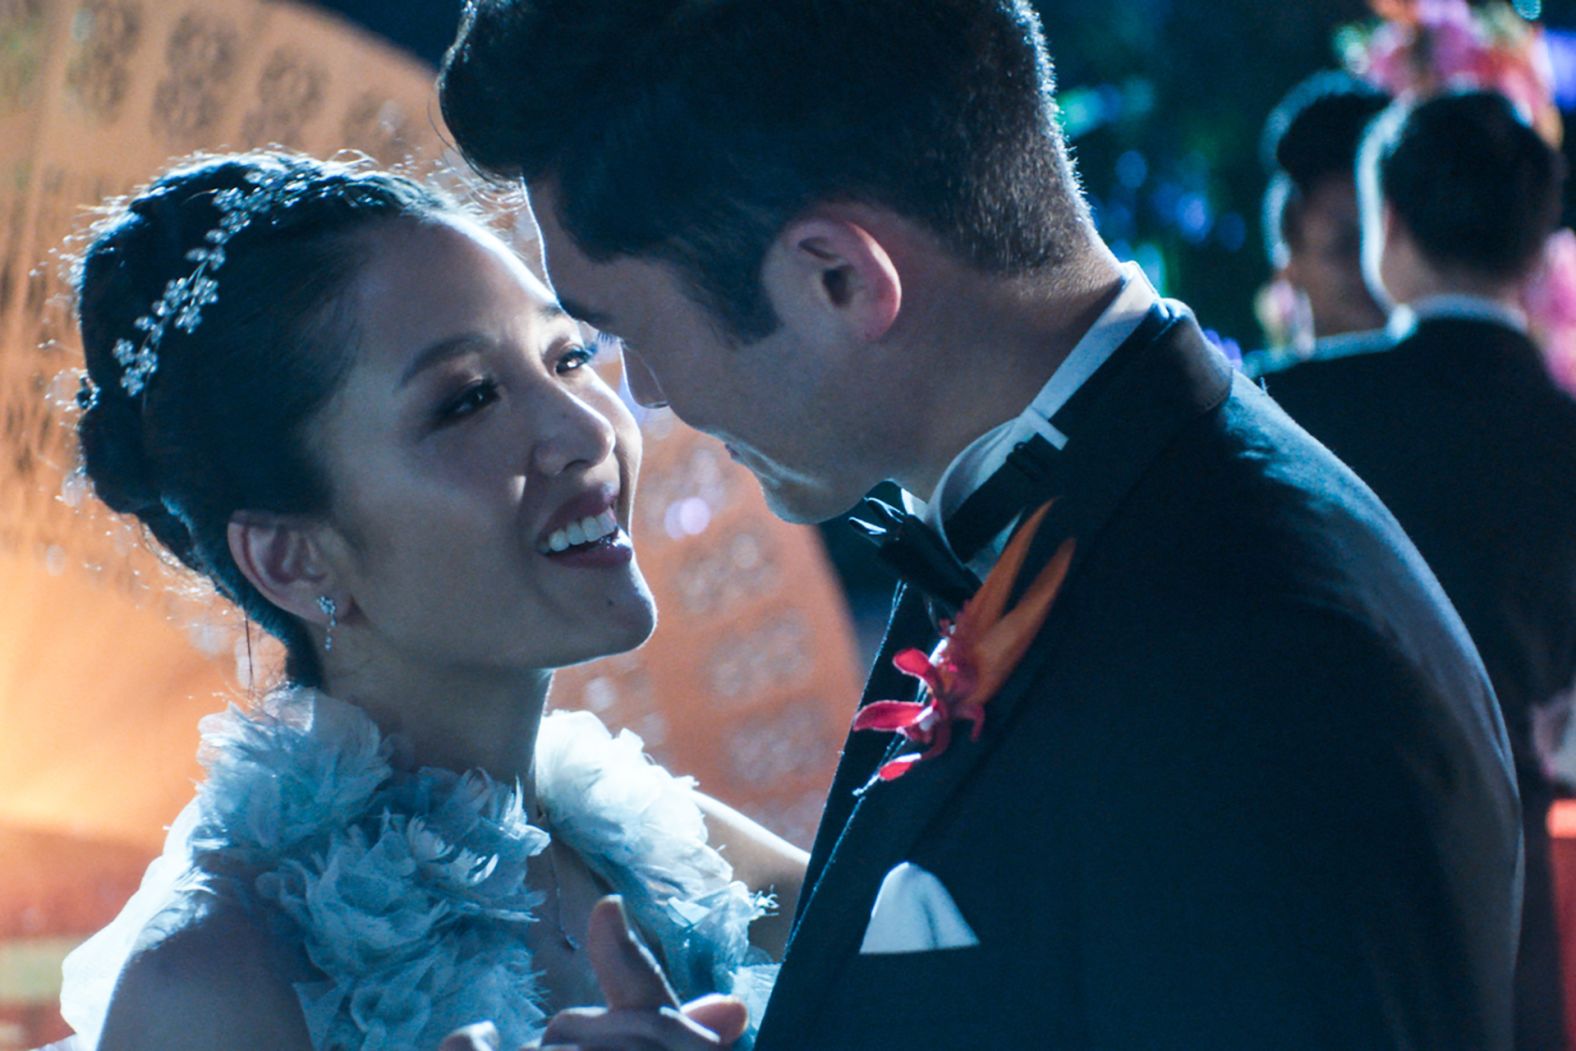 <strong>"Crazy Rich Asians" (2018): </strong>New Yorker Rachel Chu (Constance Wu) is invited to the wedding of the best friend of her boyfriend Nick Young (Henry Golding), in Singapore. What she doesn't know is that Nick's family is beyond rich and their lifestyle is filled with excess. In Singapore, Nick is also an eligible bachelor, and no one really understands why he's dating Rachel, especially Nick's mother. This colorful rom-com has it all -- humor, high-class family drama, ex-girlfriends and gorgeous locales. <br />